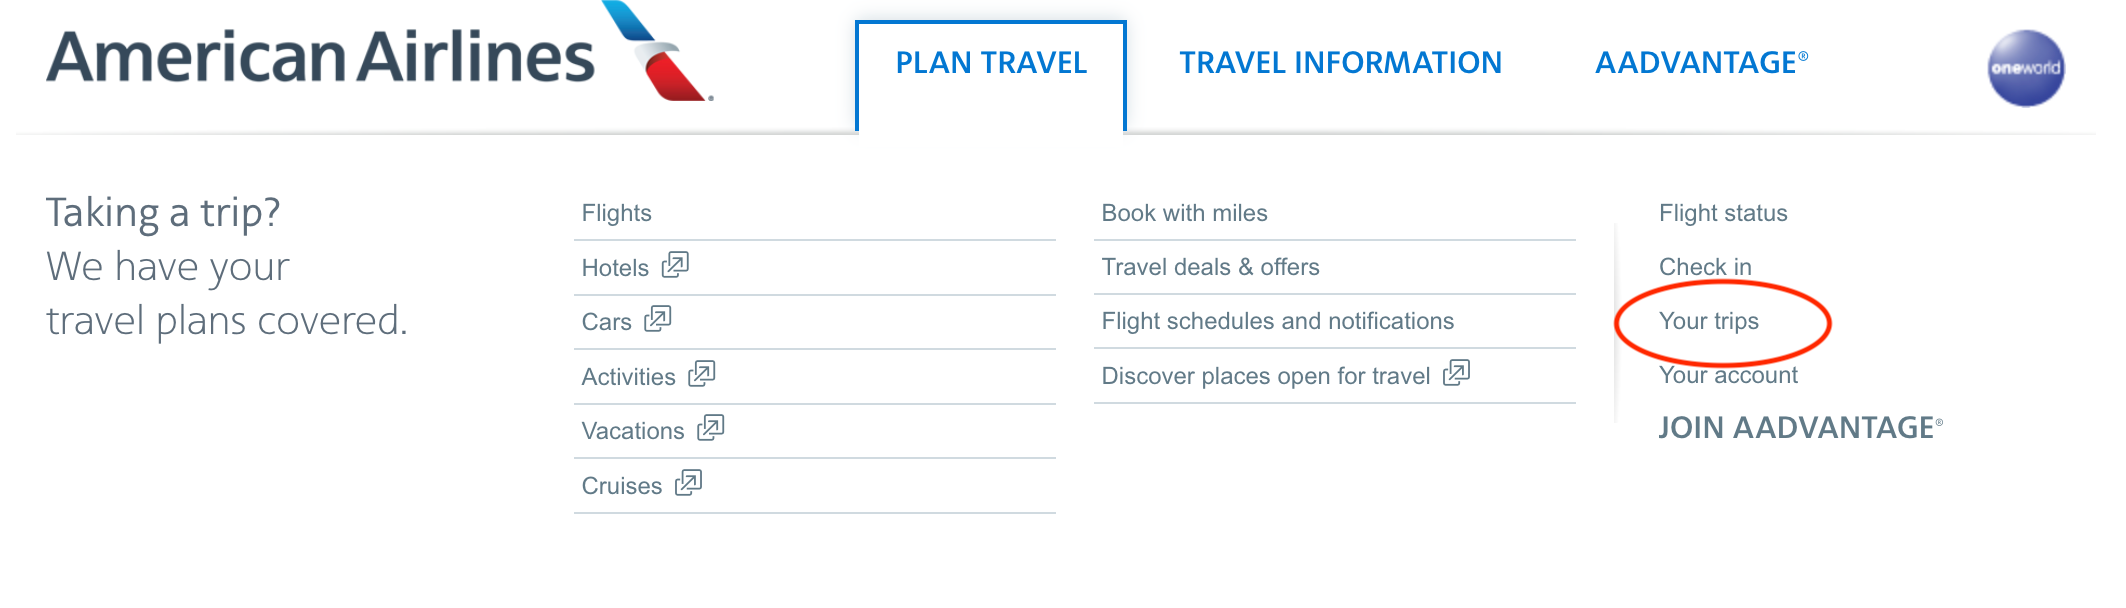 future travel credit american airlines